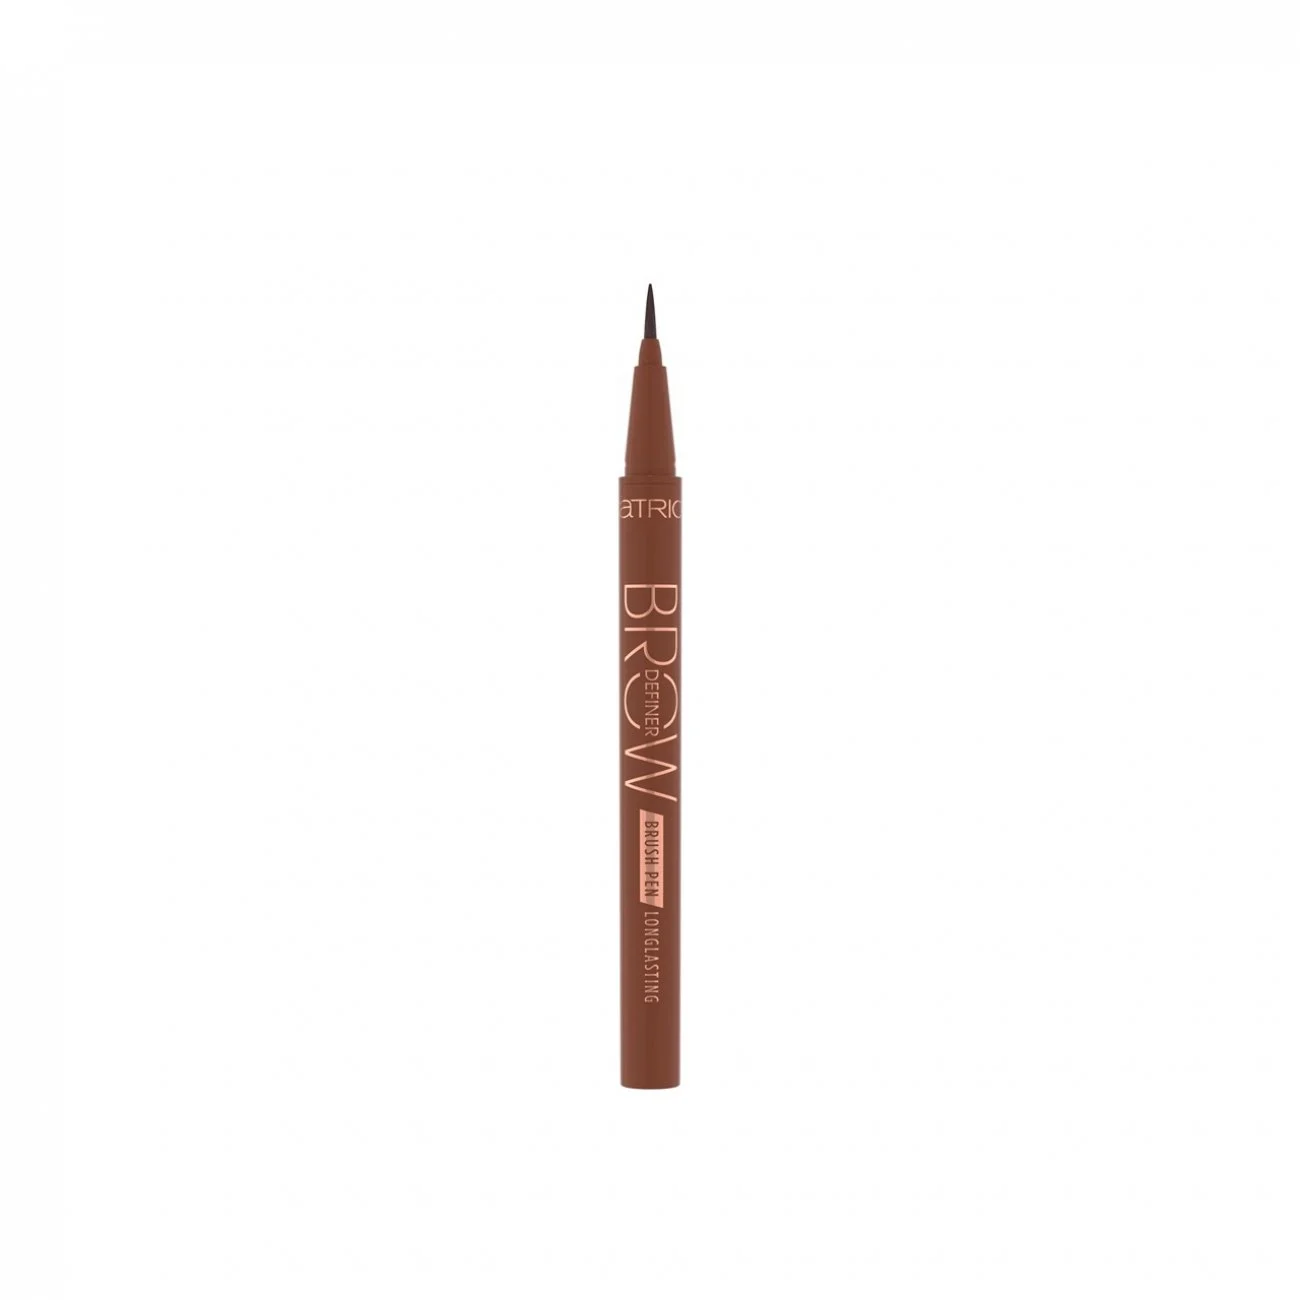 A brown Catrice - Brow Definer Brush Pen Longlasting 020 on a white background.